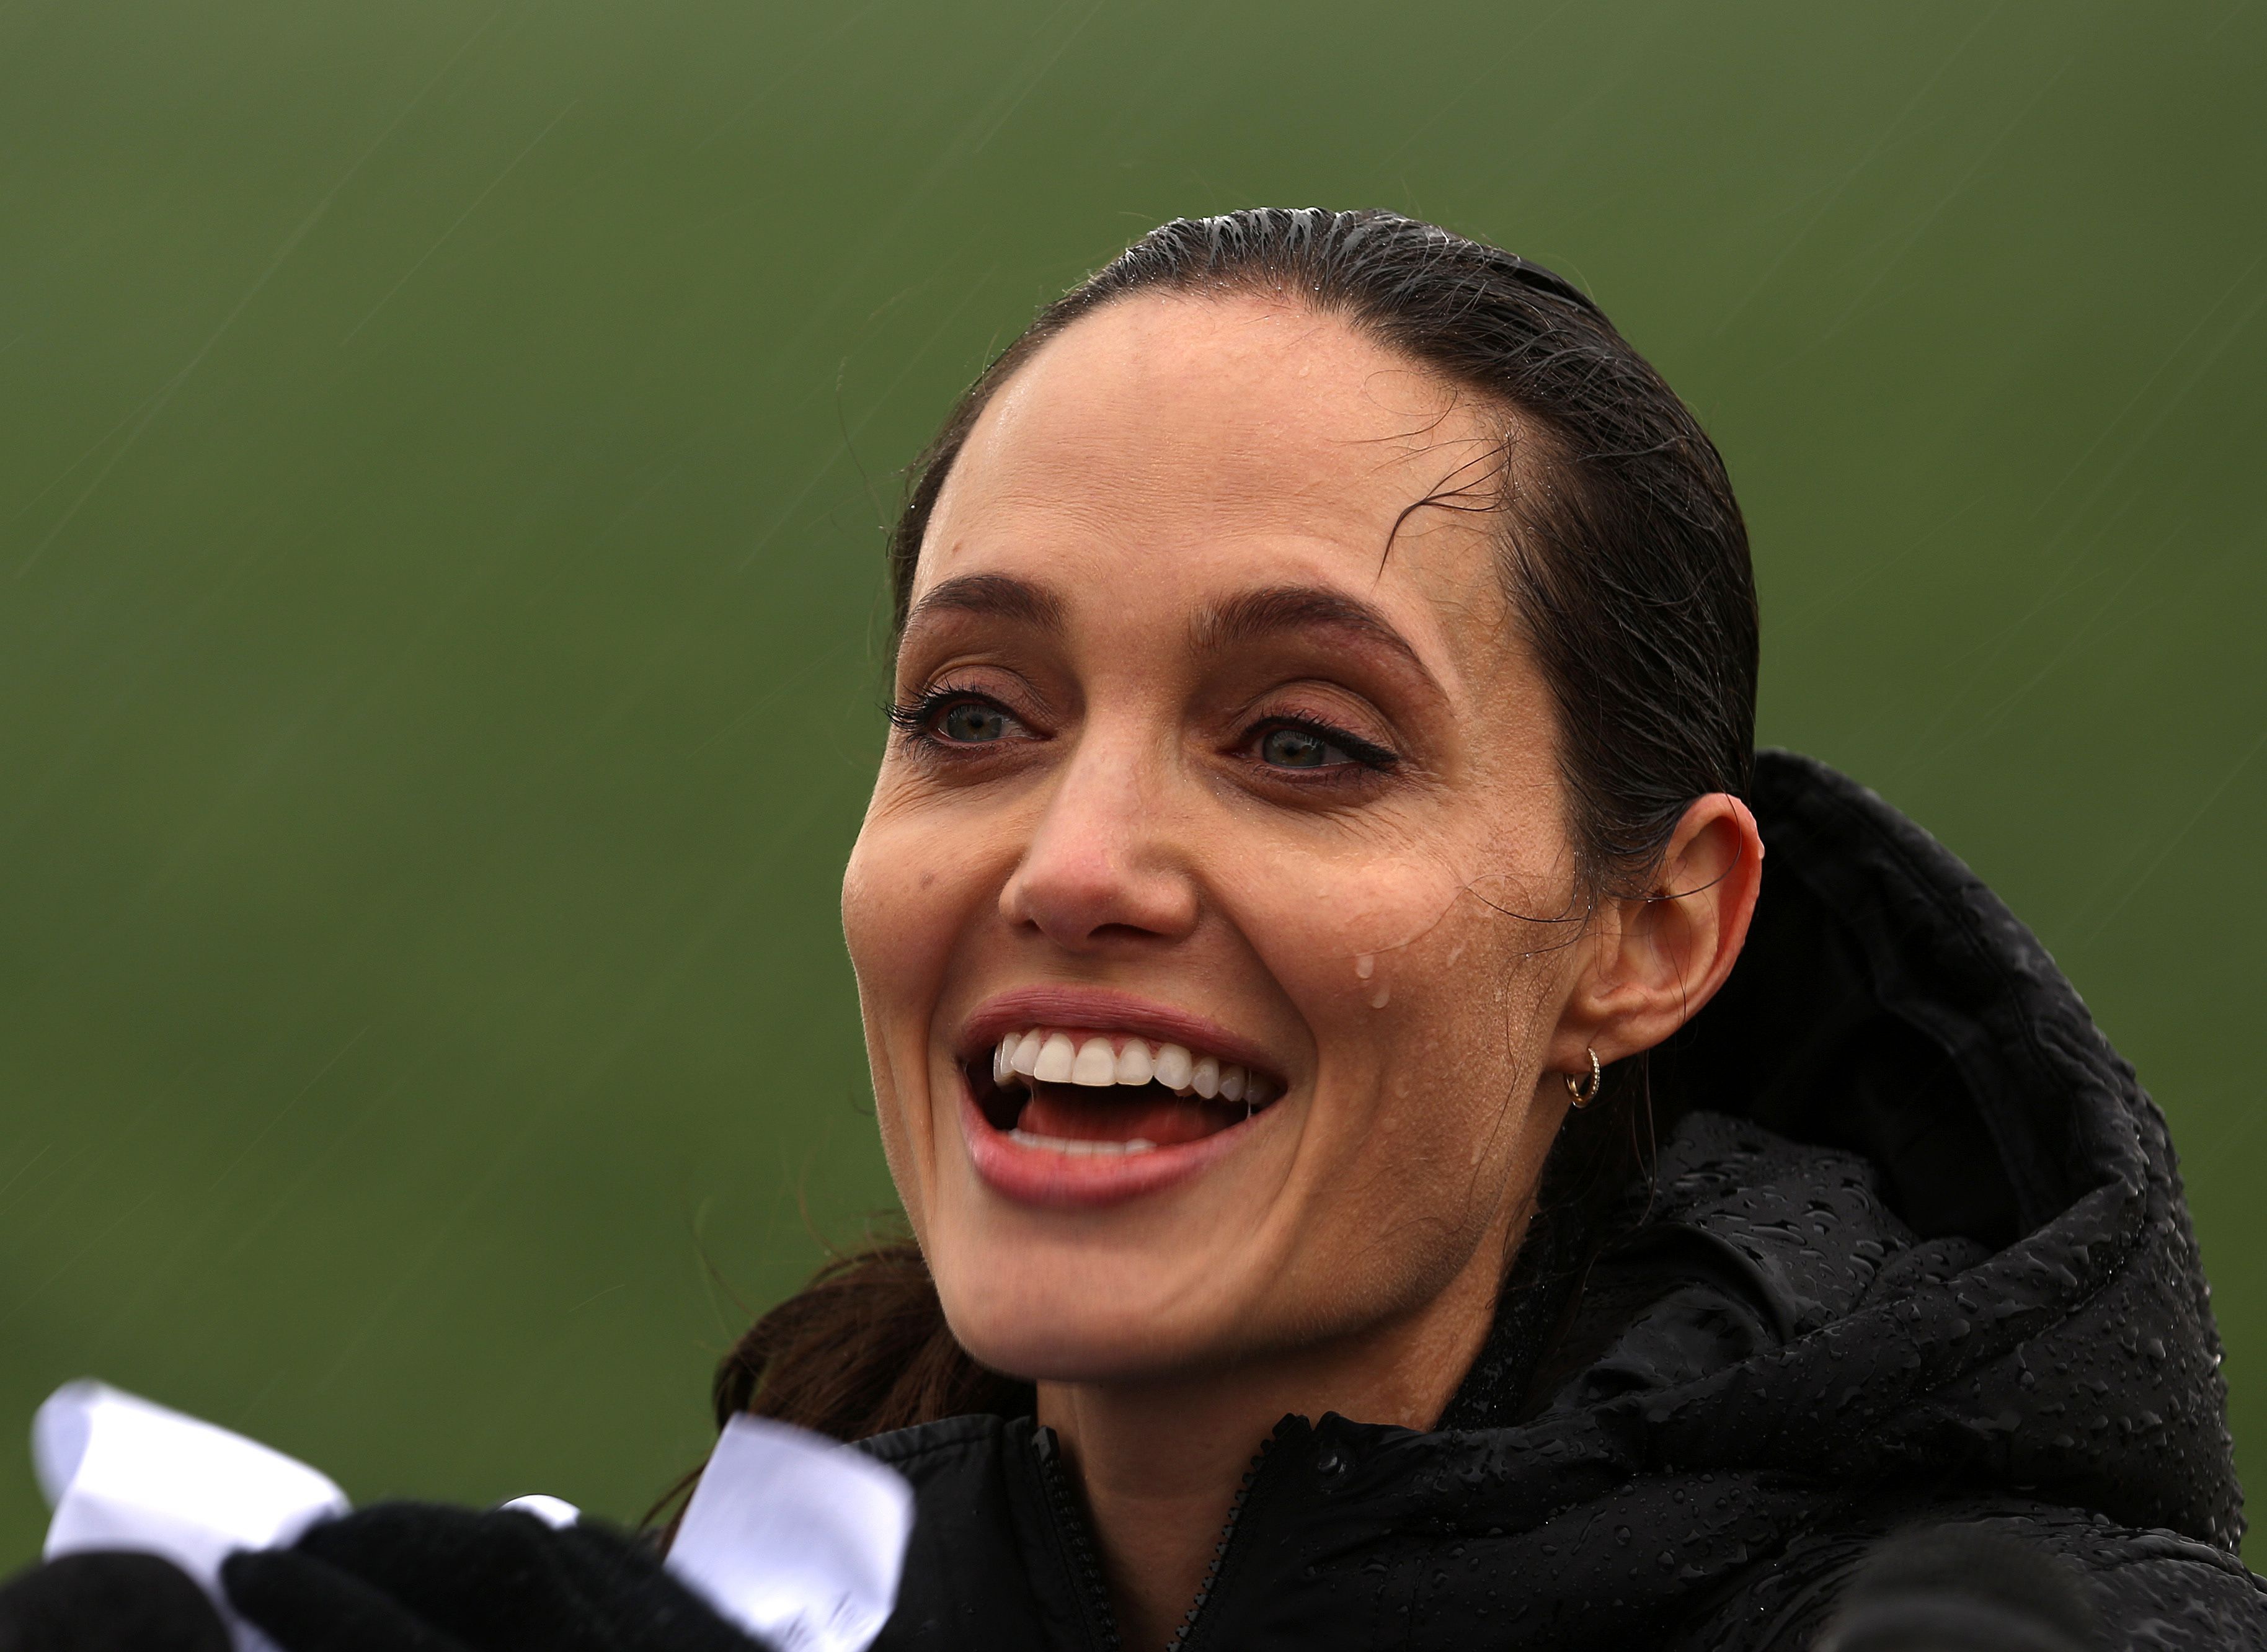 Special envoy of the UN High Commissioner for Refugees, US actress Angelina Jolie reacts during a press conference under the rain as part of her visit at a Syrian refugee camp near the city of Zahle in Lebanon's Bekaa Valley on March 15, 2016. (PATRICK BAZ&mdash;AFP/Getty Images)